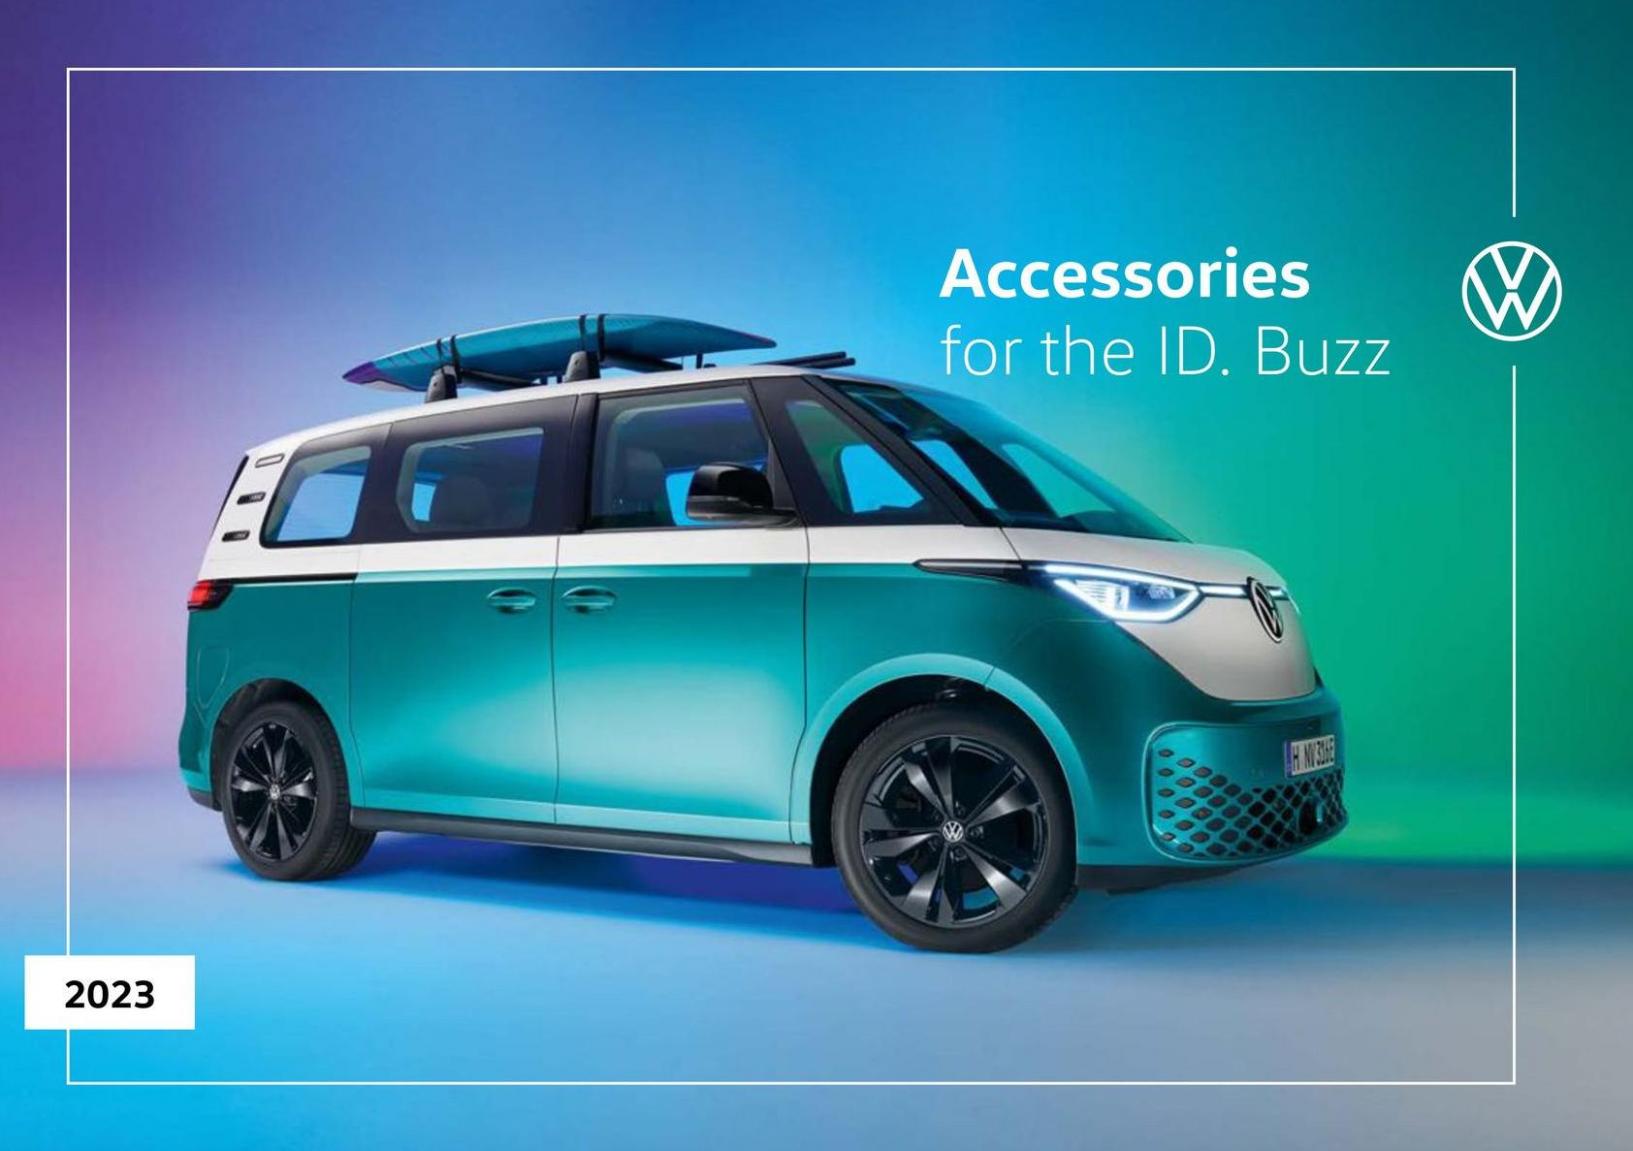 Accessories For The ID. Buzz. Volkswagen (2023-12-31-2023-12-31)